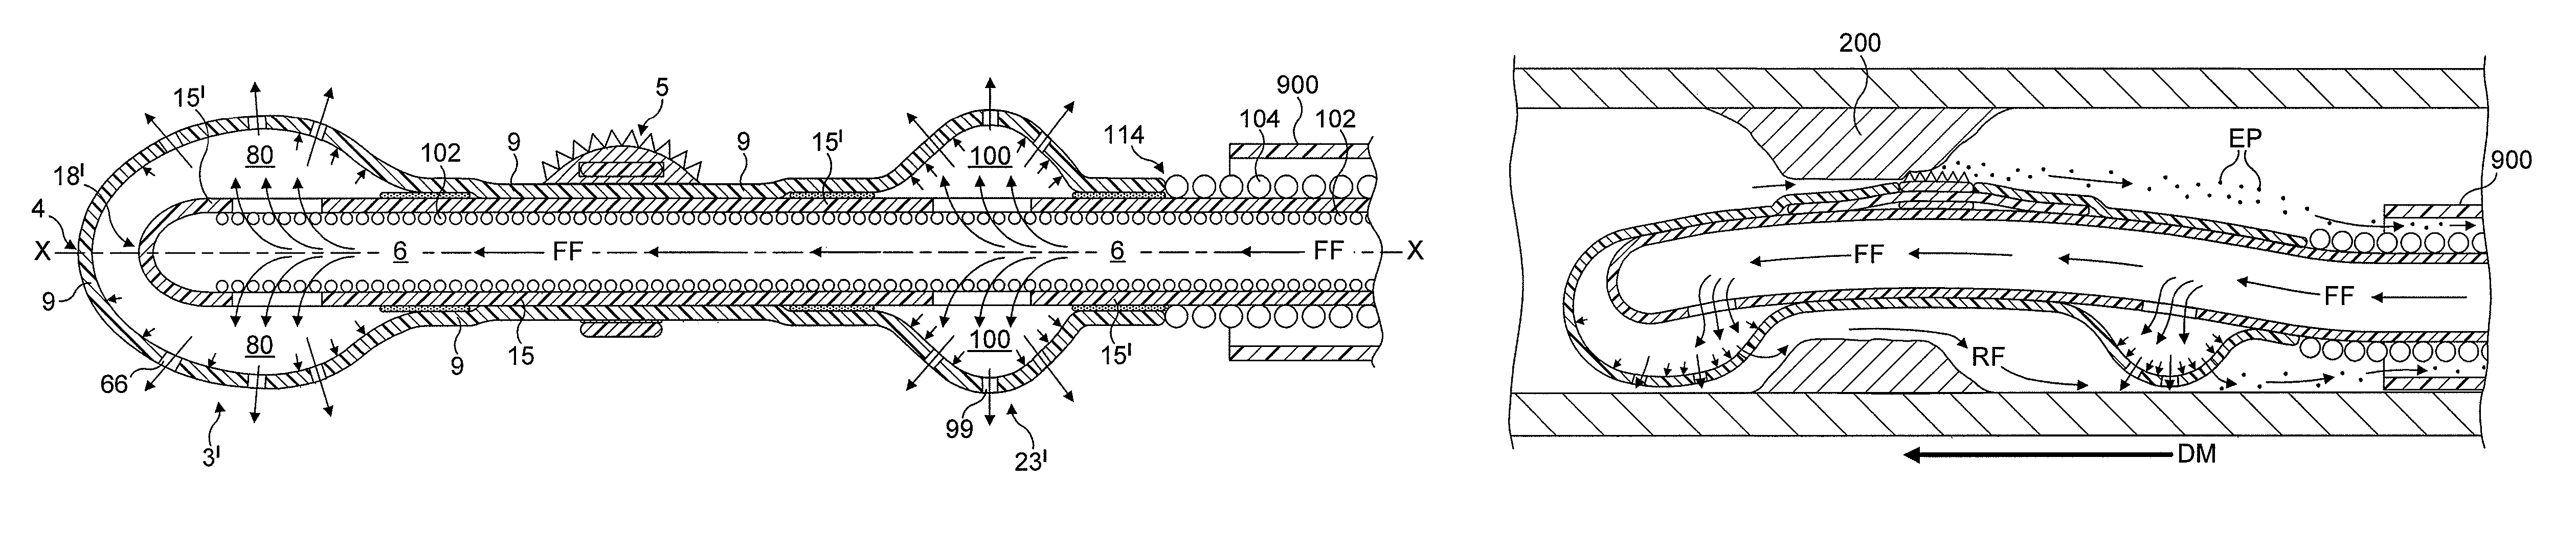 Rotational atherectomy device with fluid inflatable support elements and distal protection capability